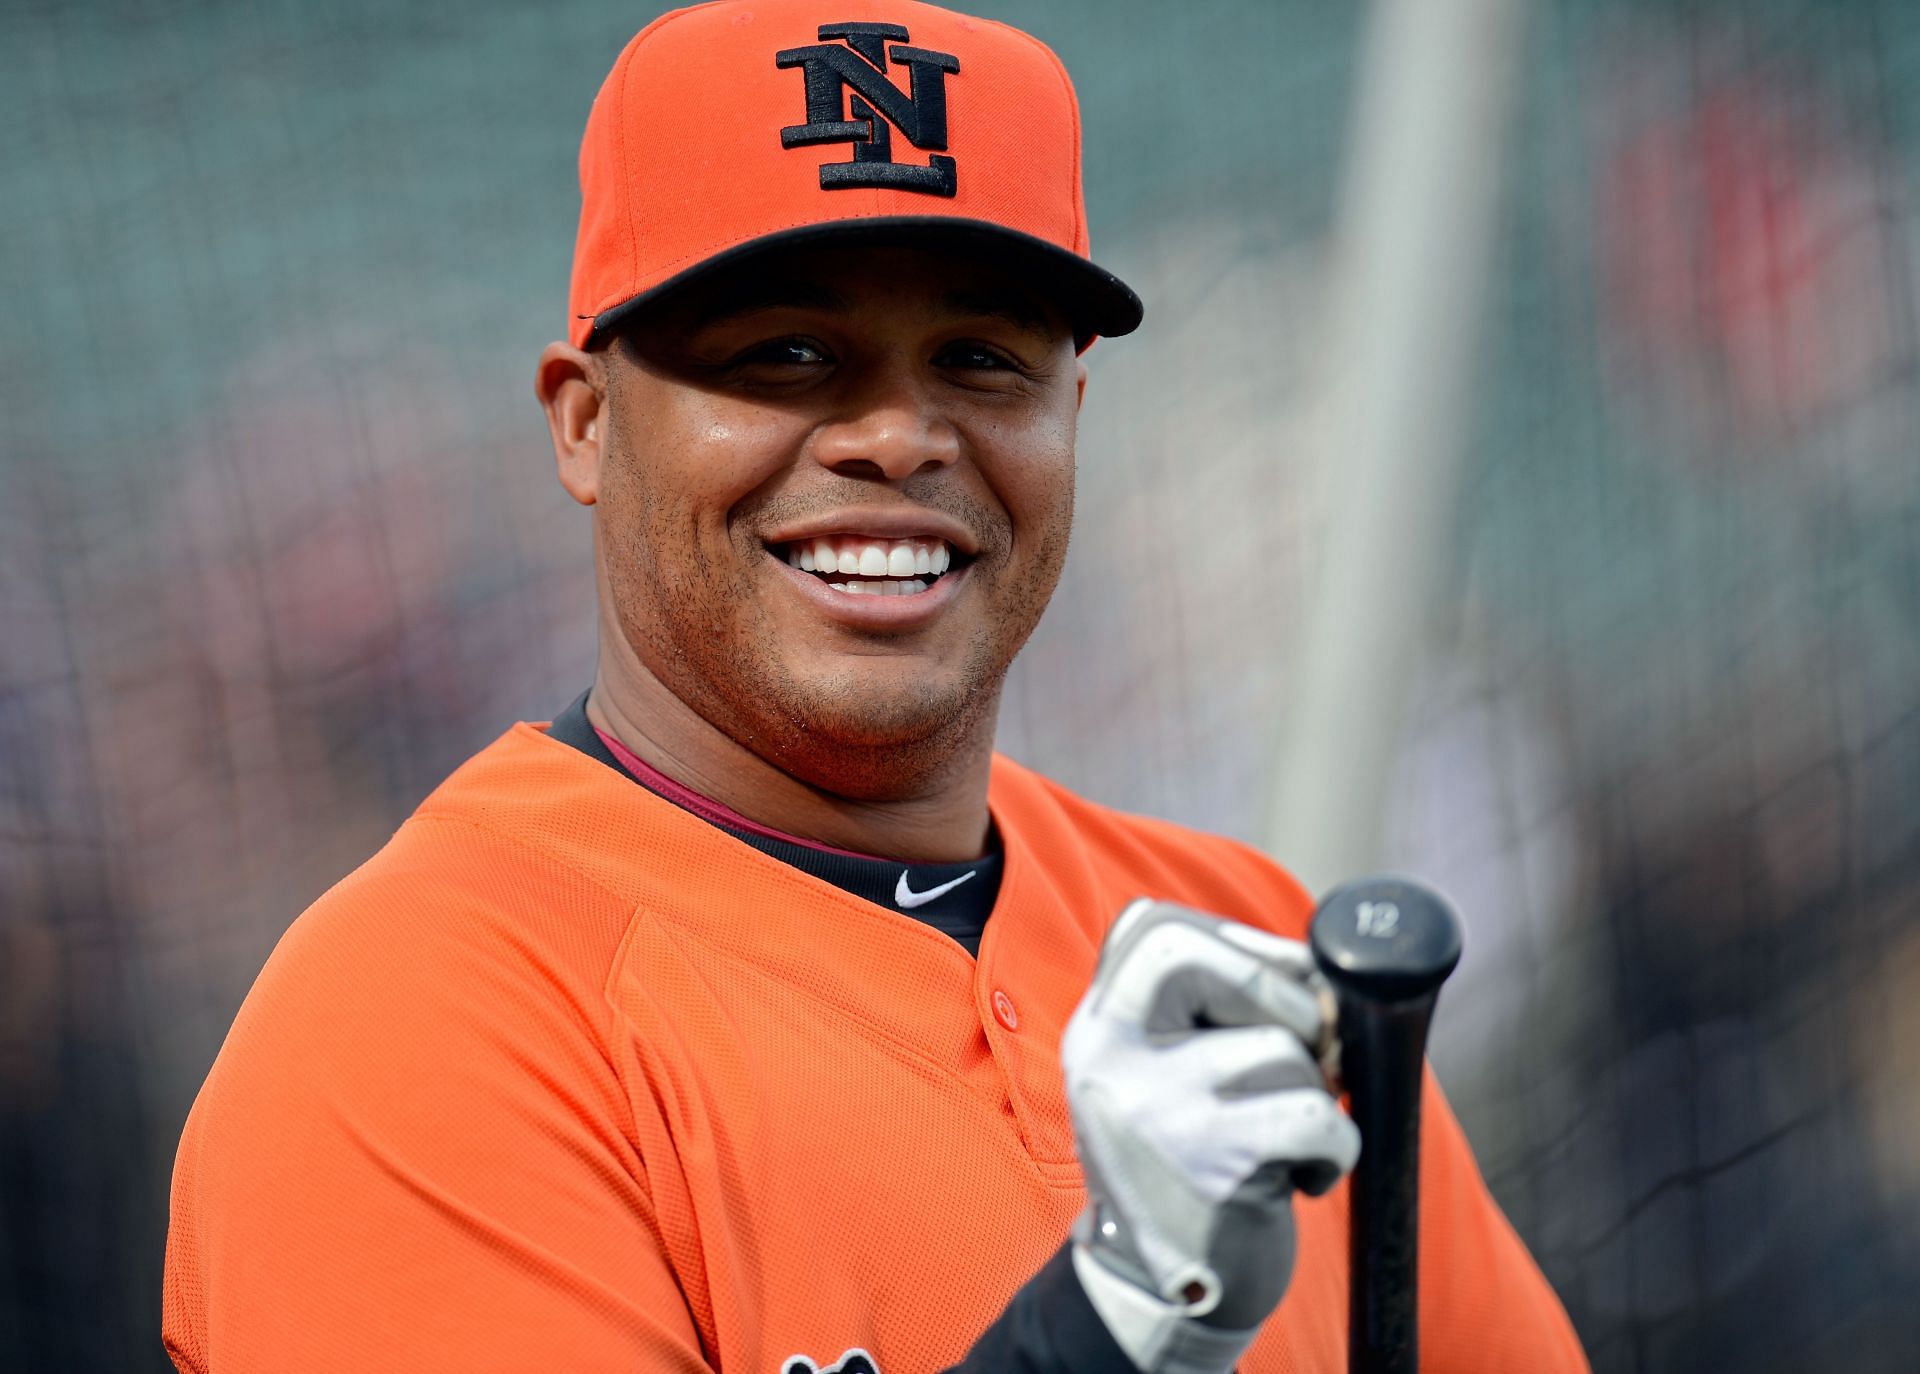 Andruw Jones stats: Andruw Jones Stats: A look at the former